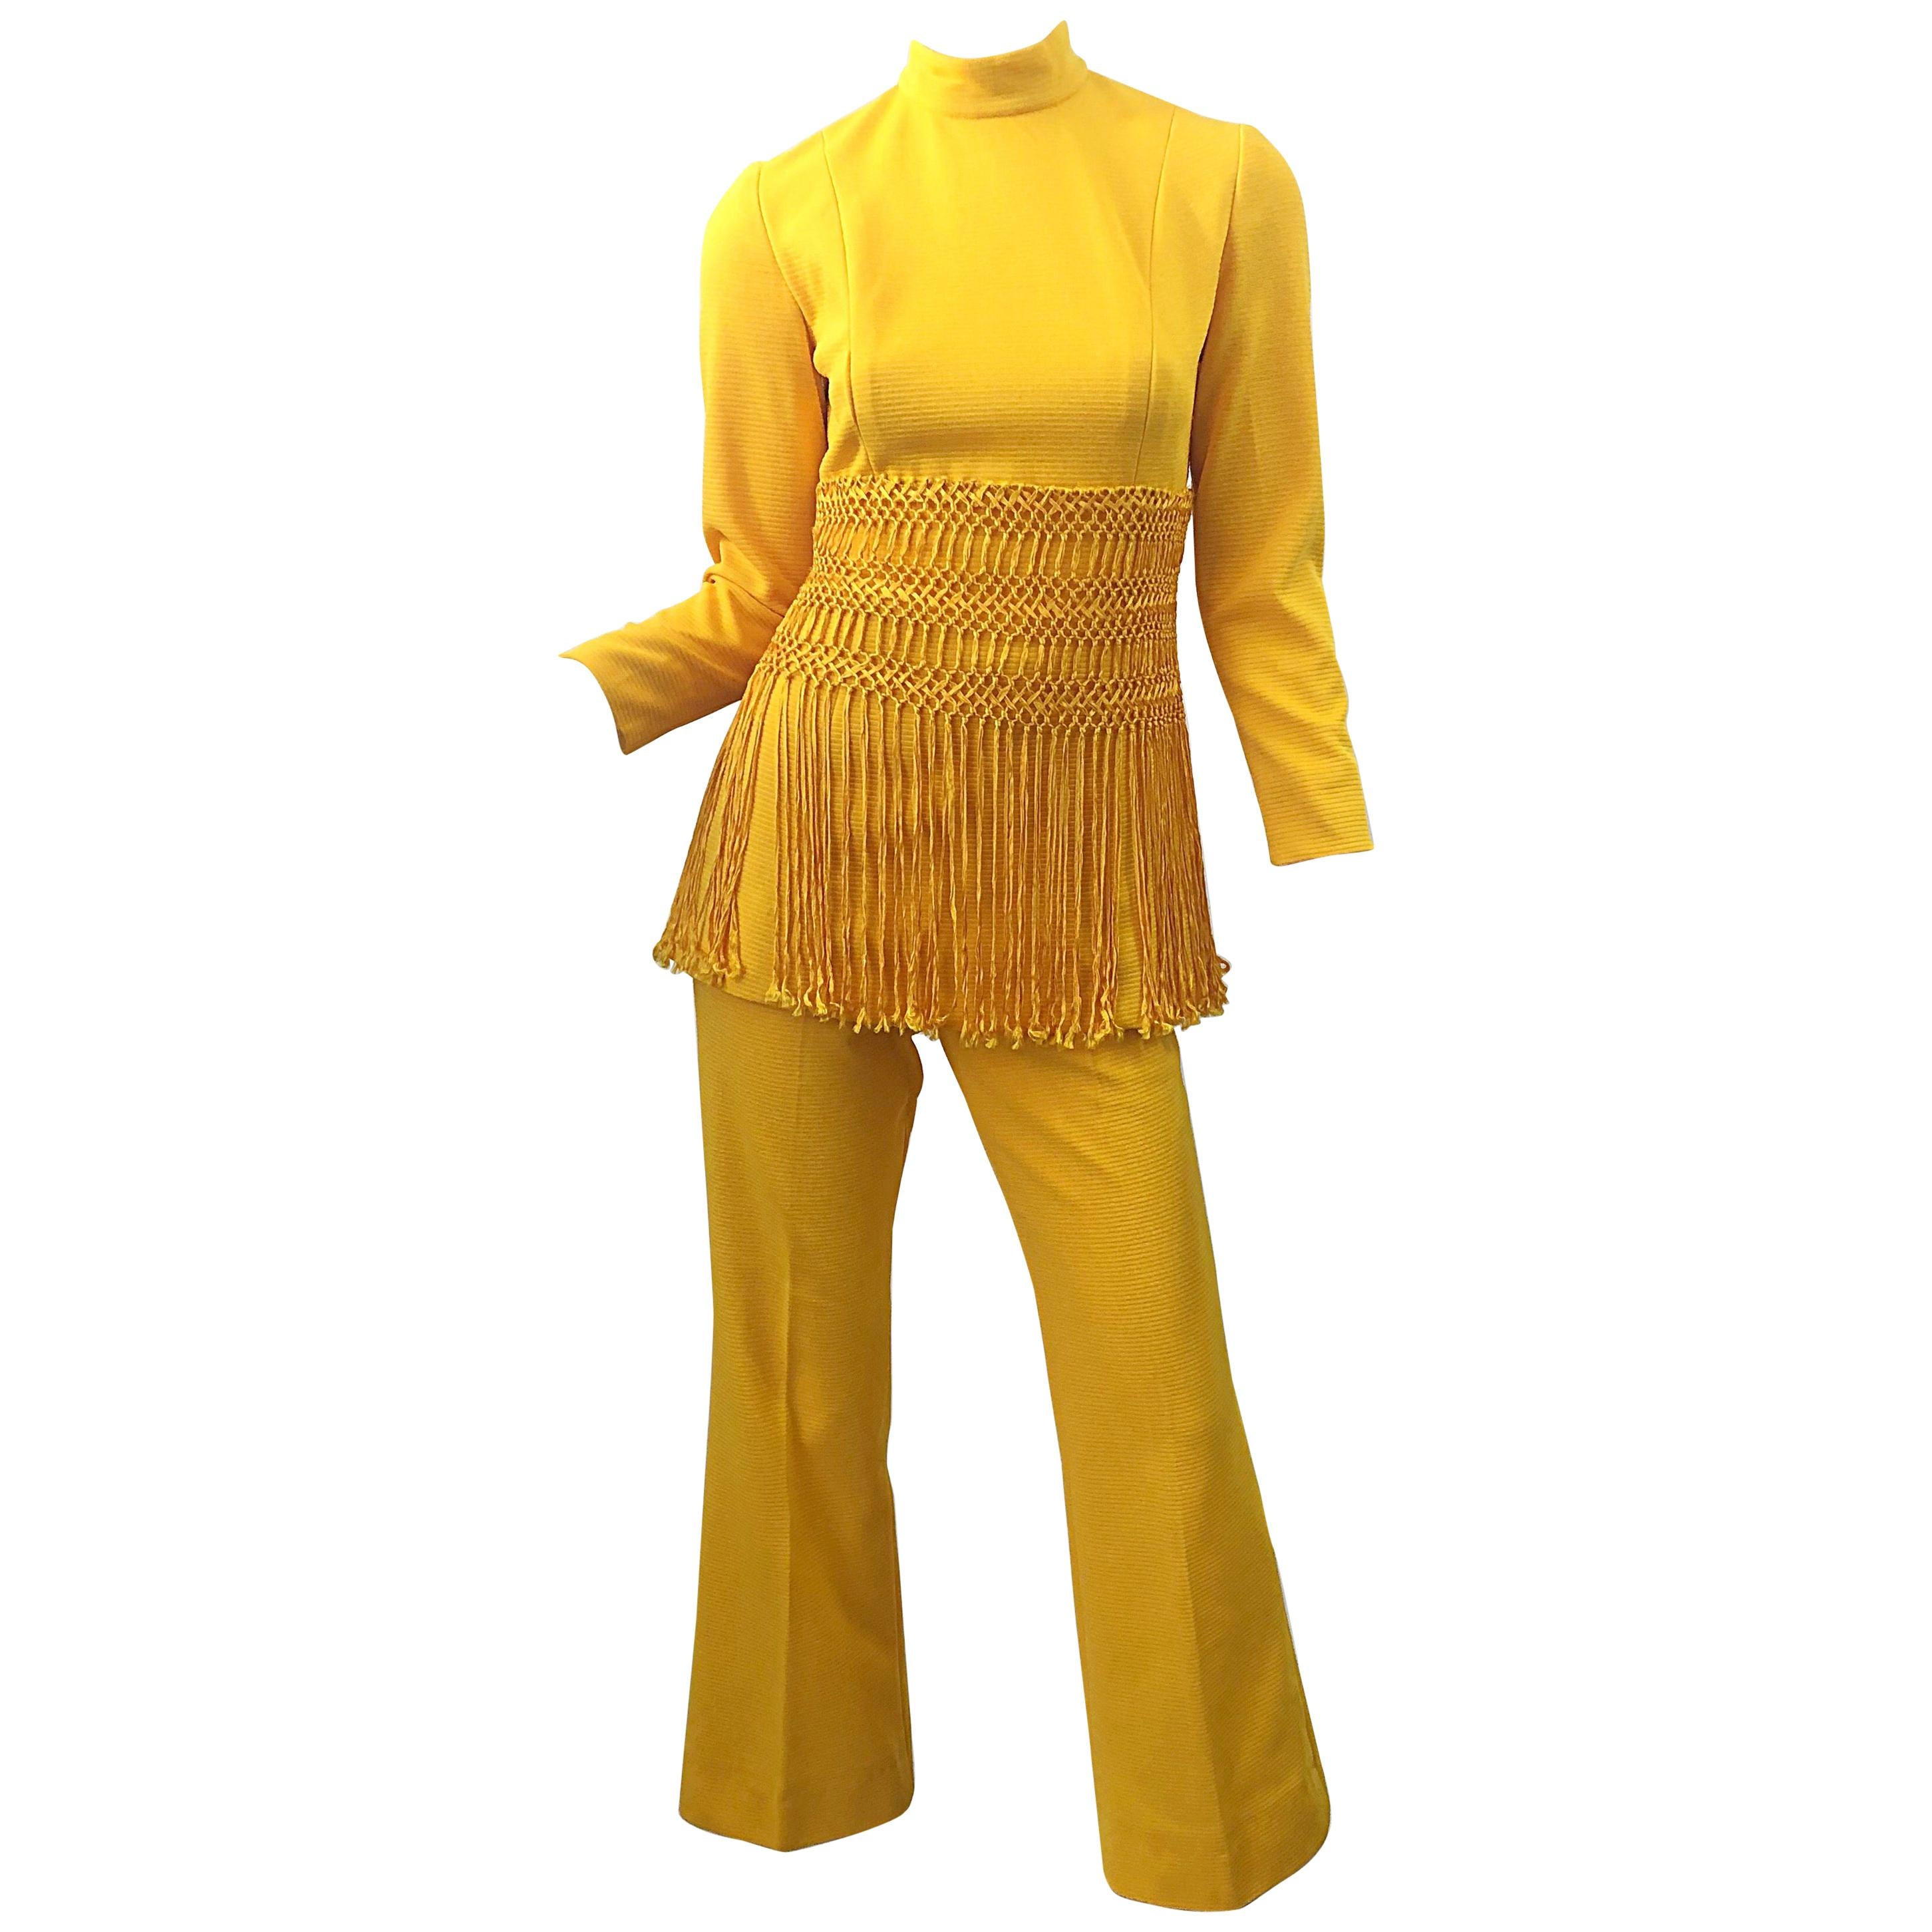 1970s Canary Yellow Fringe Vintage Knit Tunic Top + 70s Bell Bottom Flared Pants